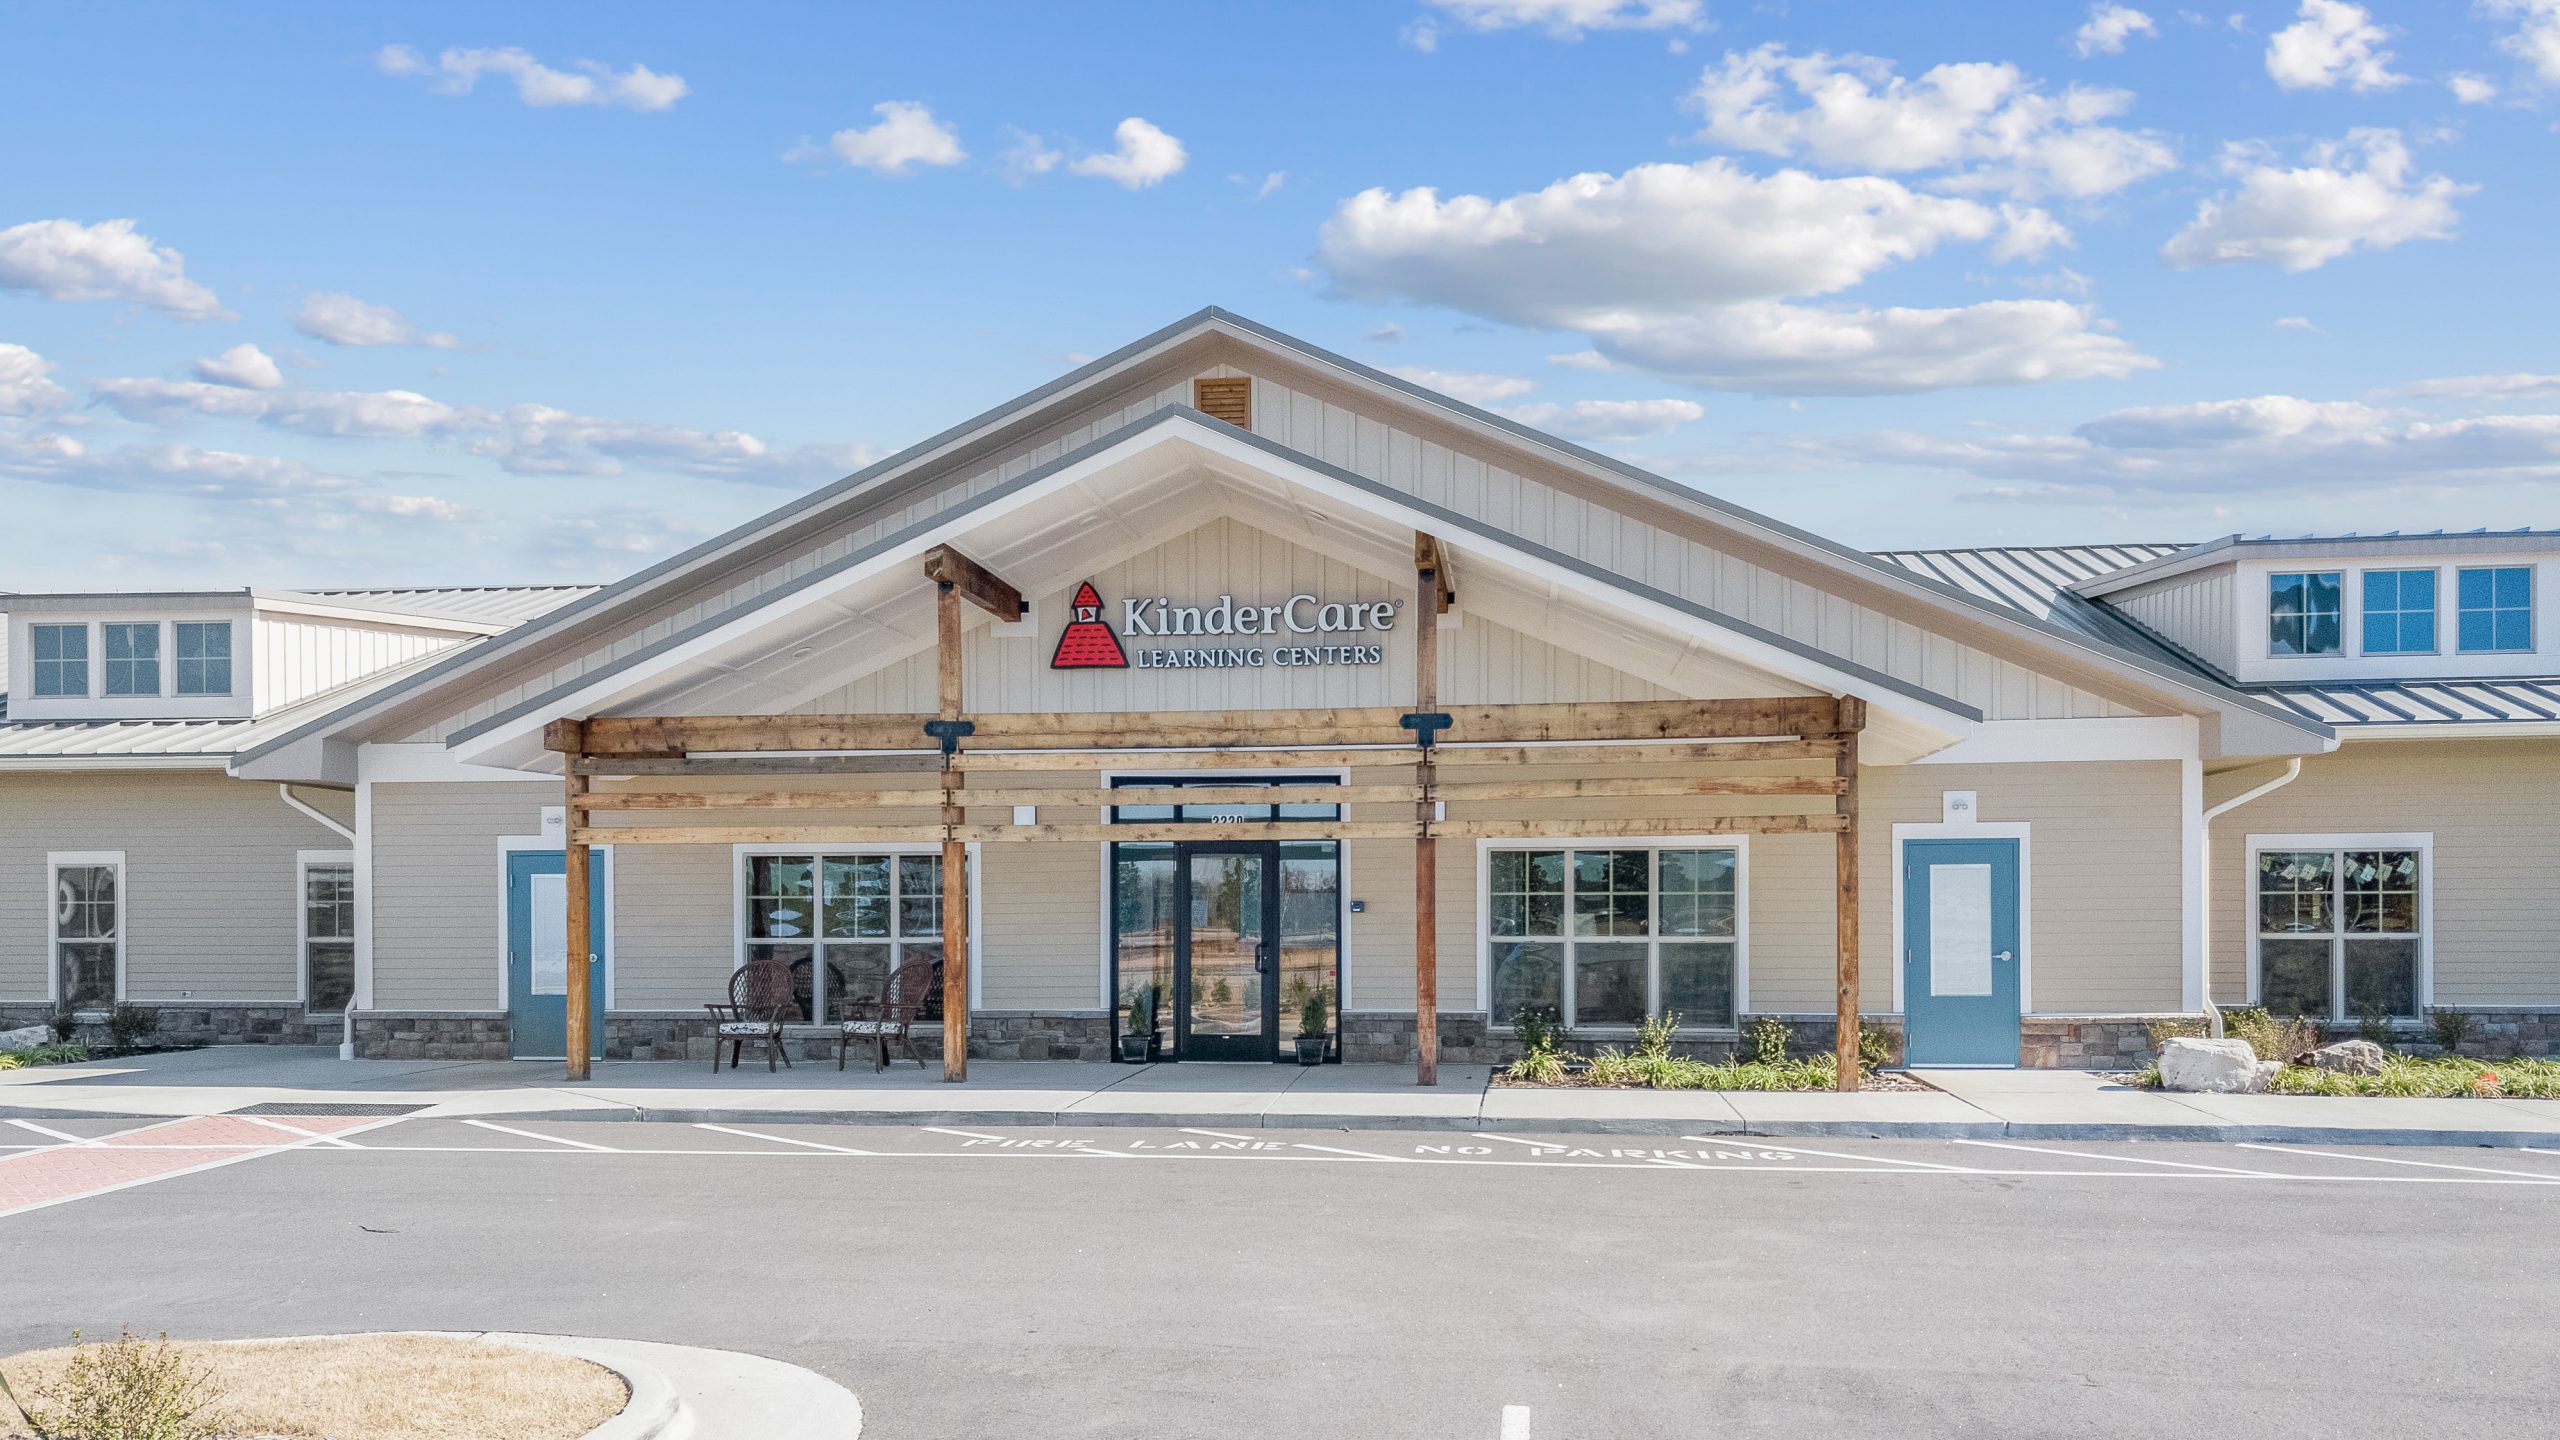 KinderCare Child Care Center | Wendell Falls, NC